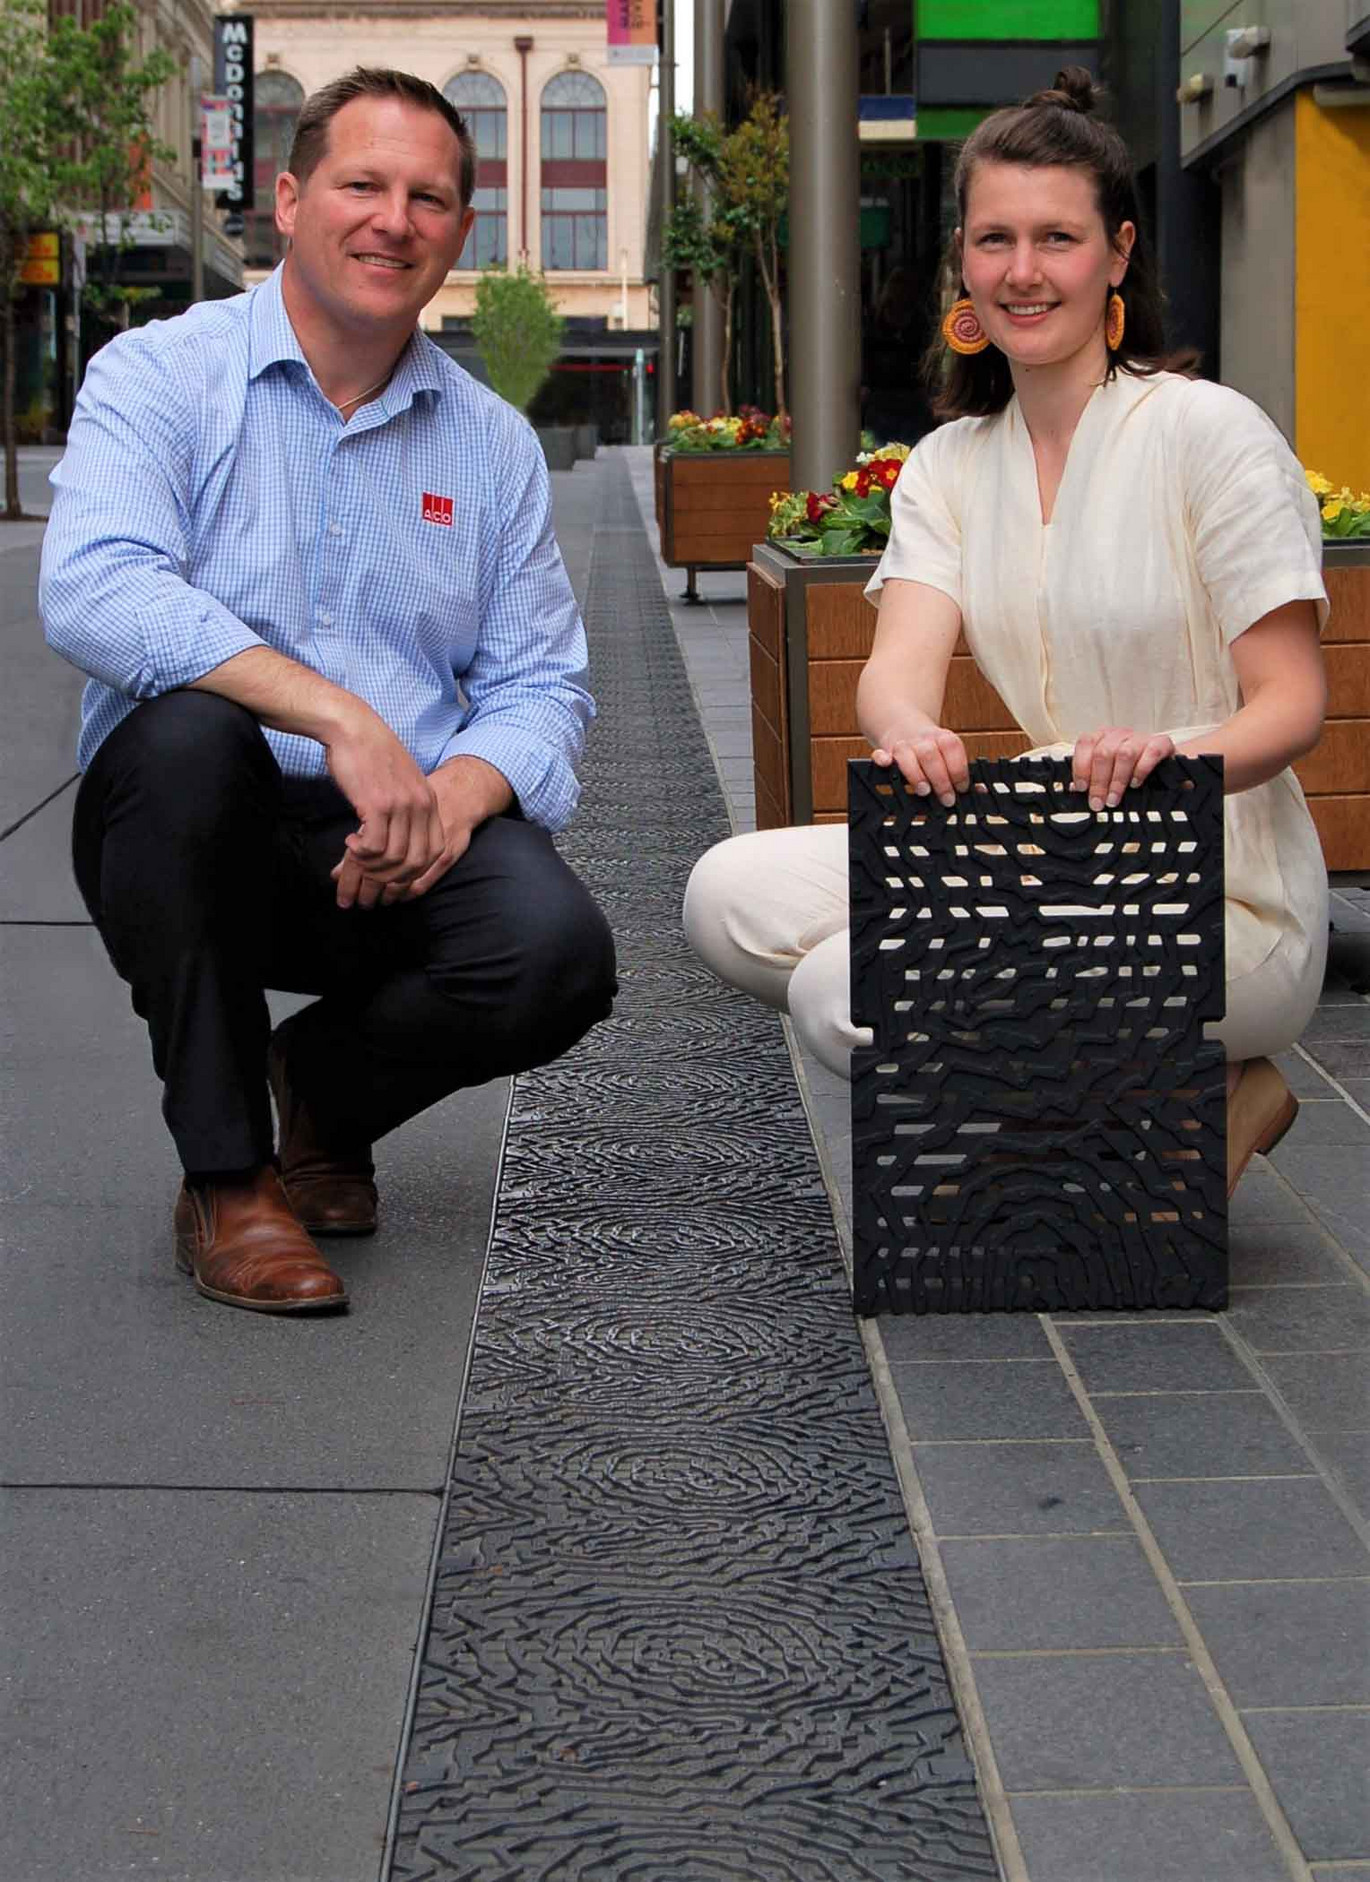 Philip Edwards and Amy Joy Watson from ACO Australia with the non-slip geode design grating